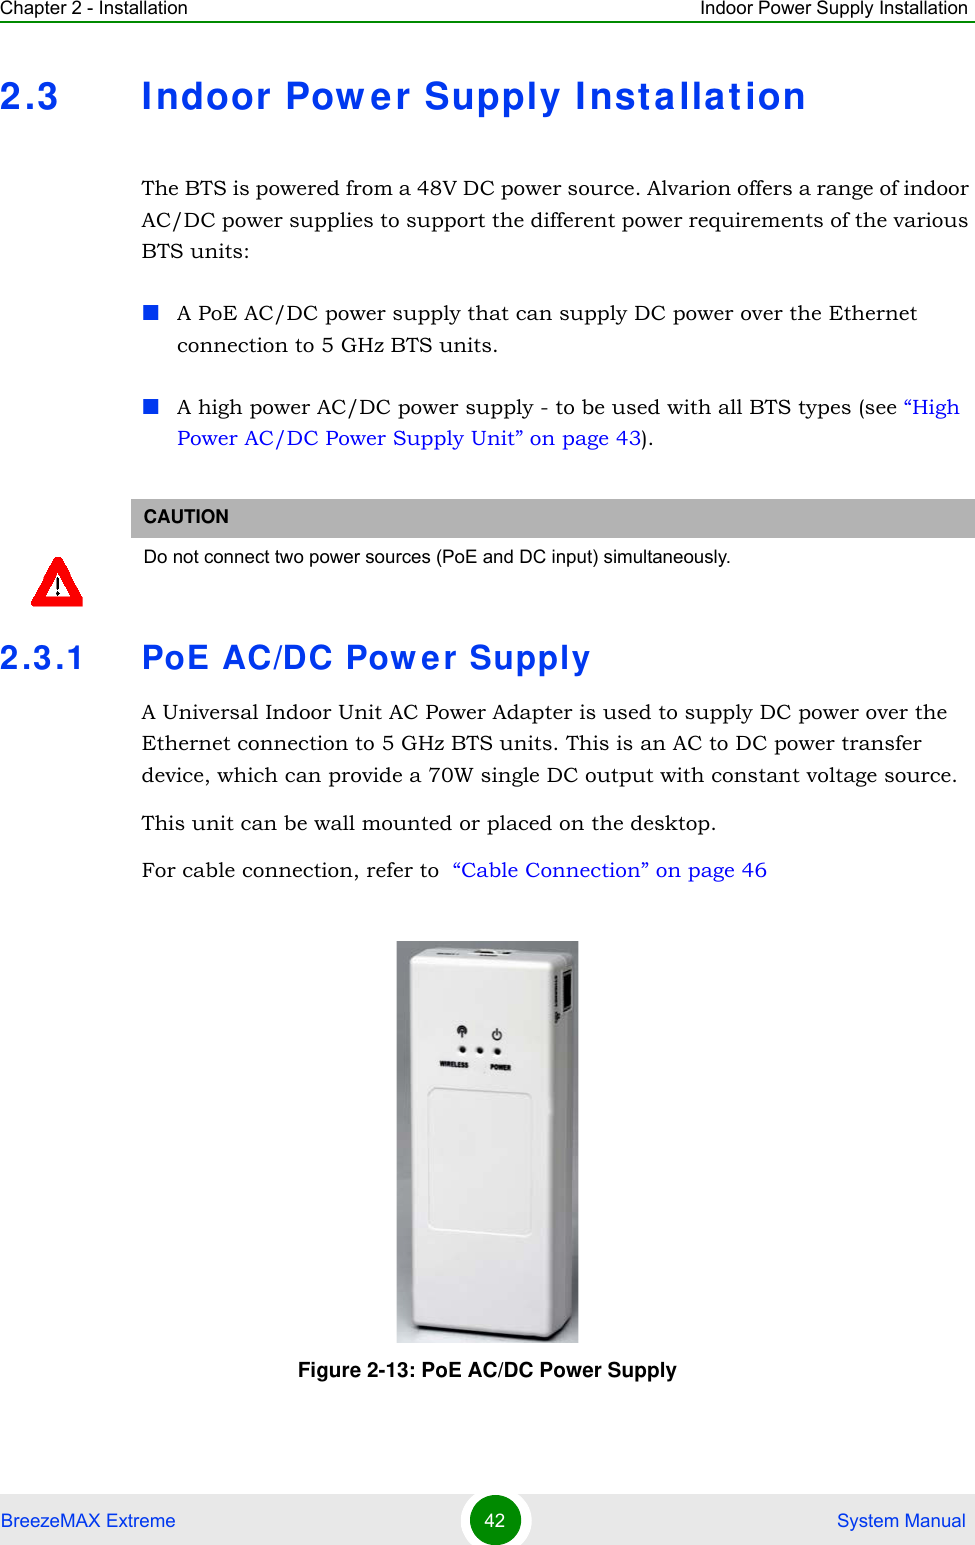 Chapter 2 - Installation Indoor Power Supply InstallationBreezeMAX Extreme 42  System Manual2.3 Indoor Pow er Supply Installat ionThe BTS is powered from a 48V DC power source. Alvarion offers a range of indoor AC/DC power supplies to support the different power requirements of the various BTS units:A PoE AC/DC power supply that can supply DC power over the Ethernet connection to 5 GHz BTS units.A high power AC/DC power supply - to be used with all BTS types (see “High Power AC/DC Power Supply Unit” on page 43).2.3.1 PoE AC/DC Pow er SupplyA Universal Indoor Unit AC Power Adapter is used to supply DC power over the Ethernet connection to 5 GHz BTS units. This is an AC to DC power transfer device, which can provide a 70W single DC output with constant voltage source.This unit can be wall mounted or placed on the desktop.For cable connection, refer to  “Cable Connection” on page 46CAUTIONDo not connect two power sources (PoE and DC input) simultaneously. Figure 2-13: PoE AC/DC Power Supply